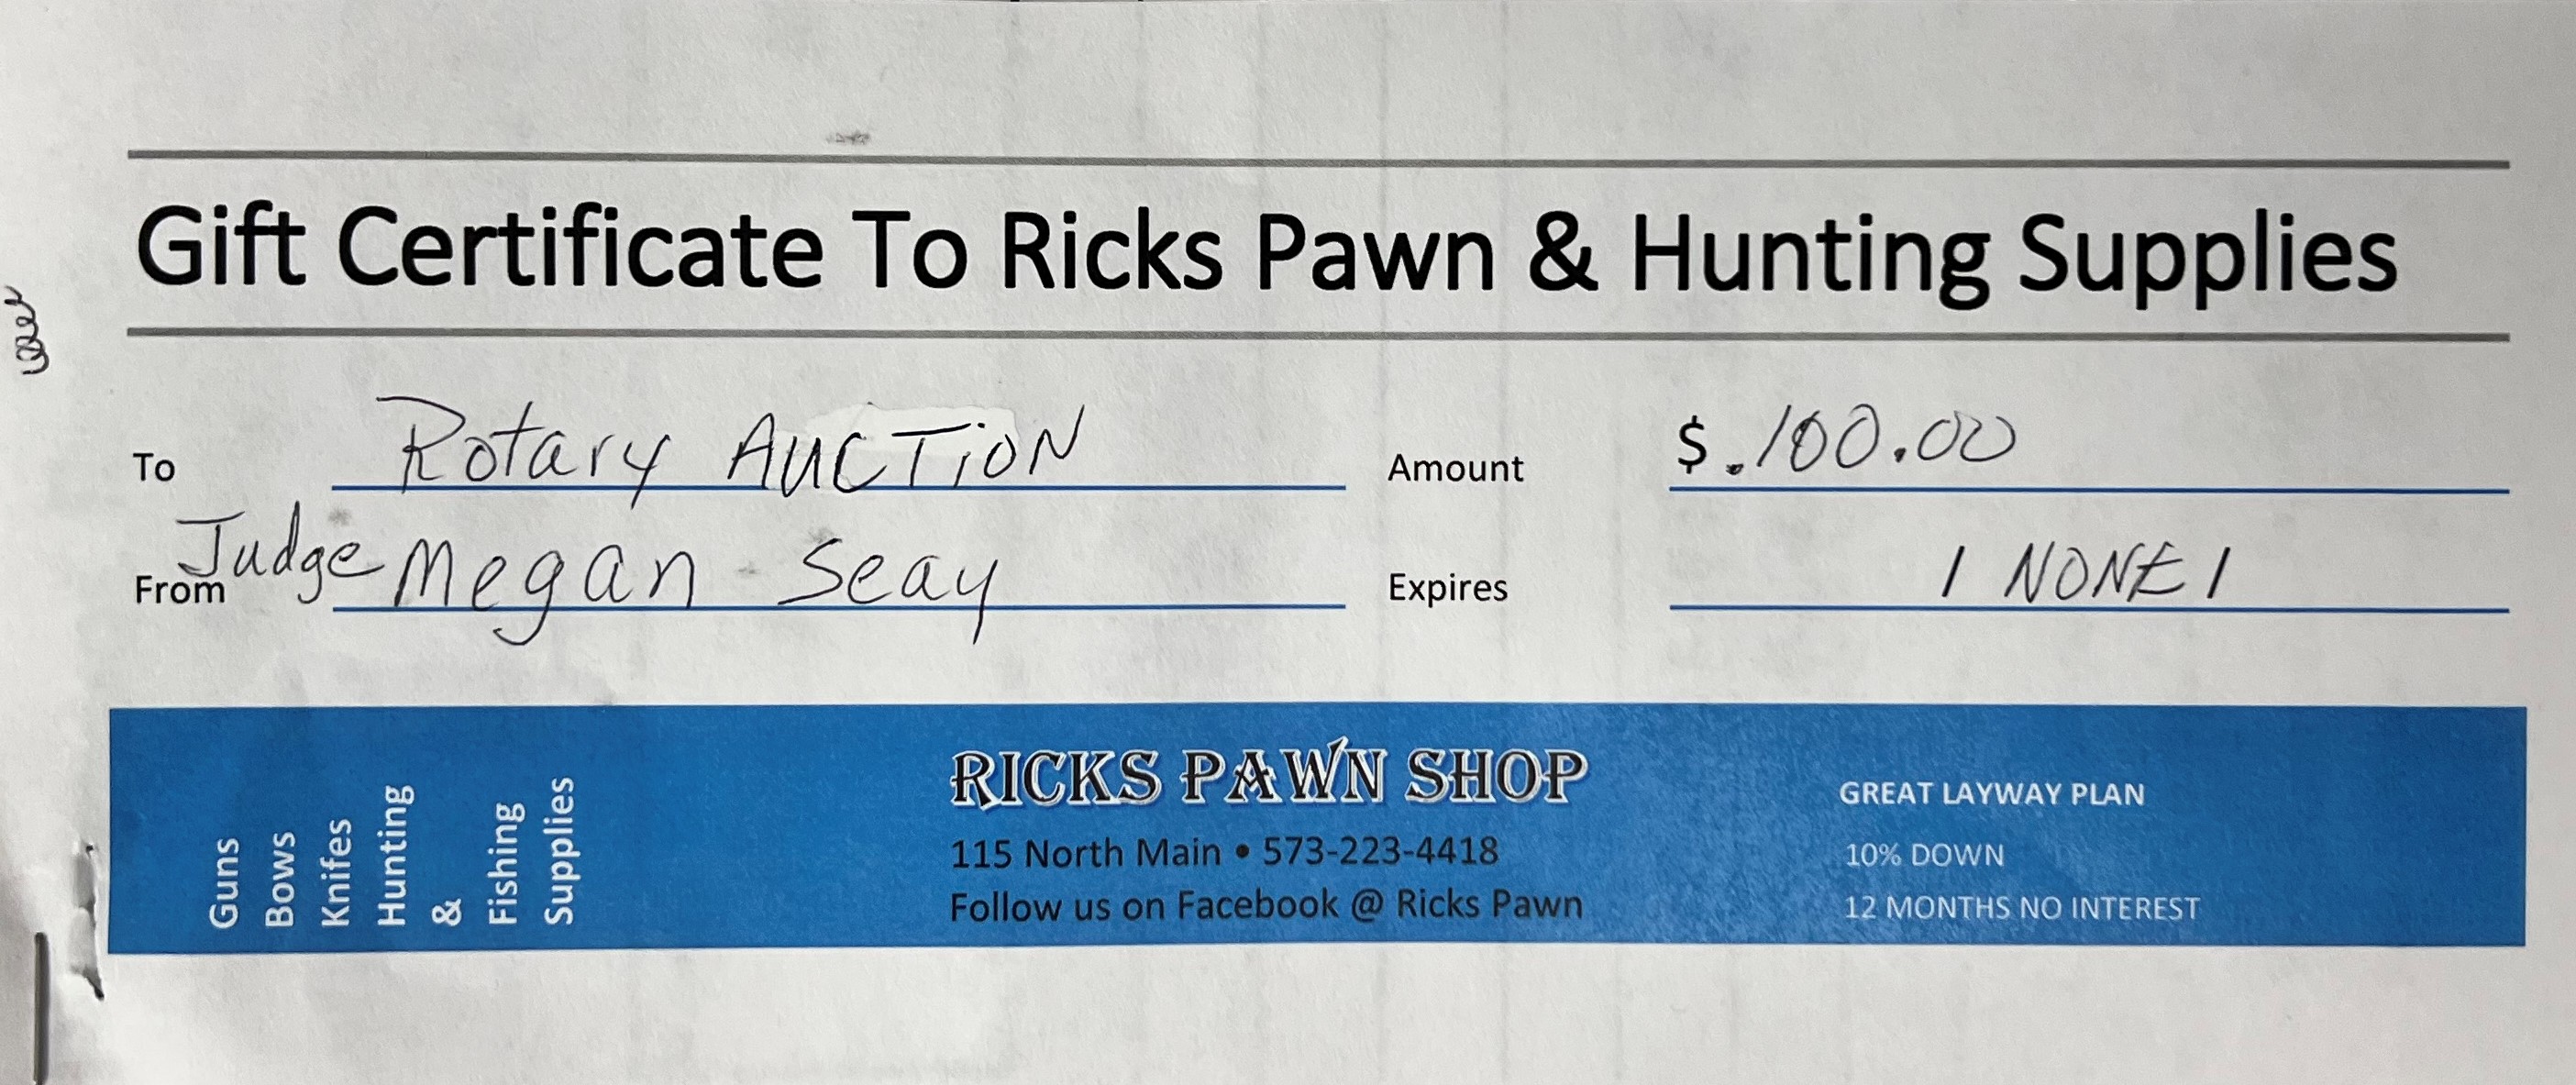 $100 Gift Certificate to Rick's Pawn